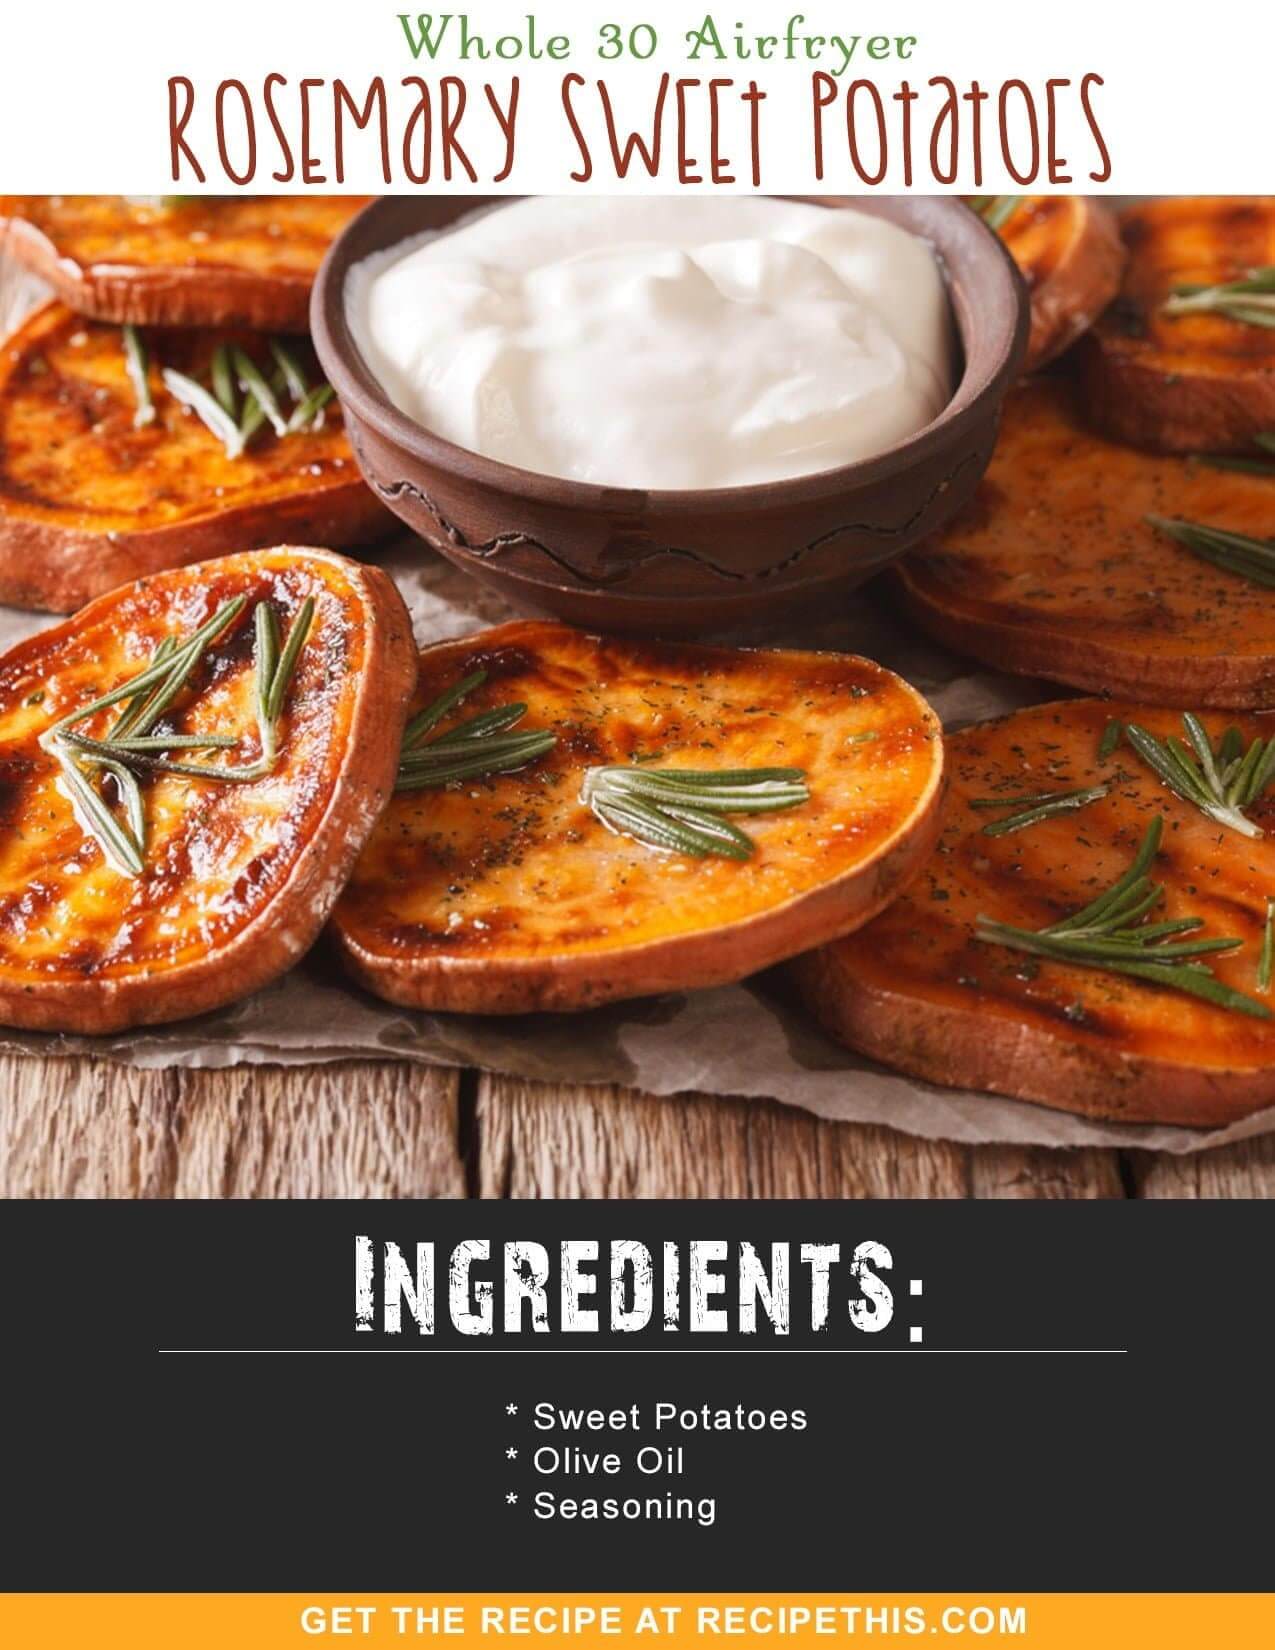 Whole 30 | Whole 30 Airfryer Rosemary Sweet Potatoes recipe from RecipeThis.com